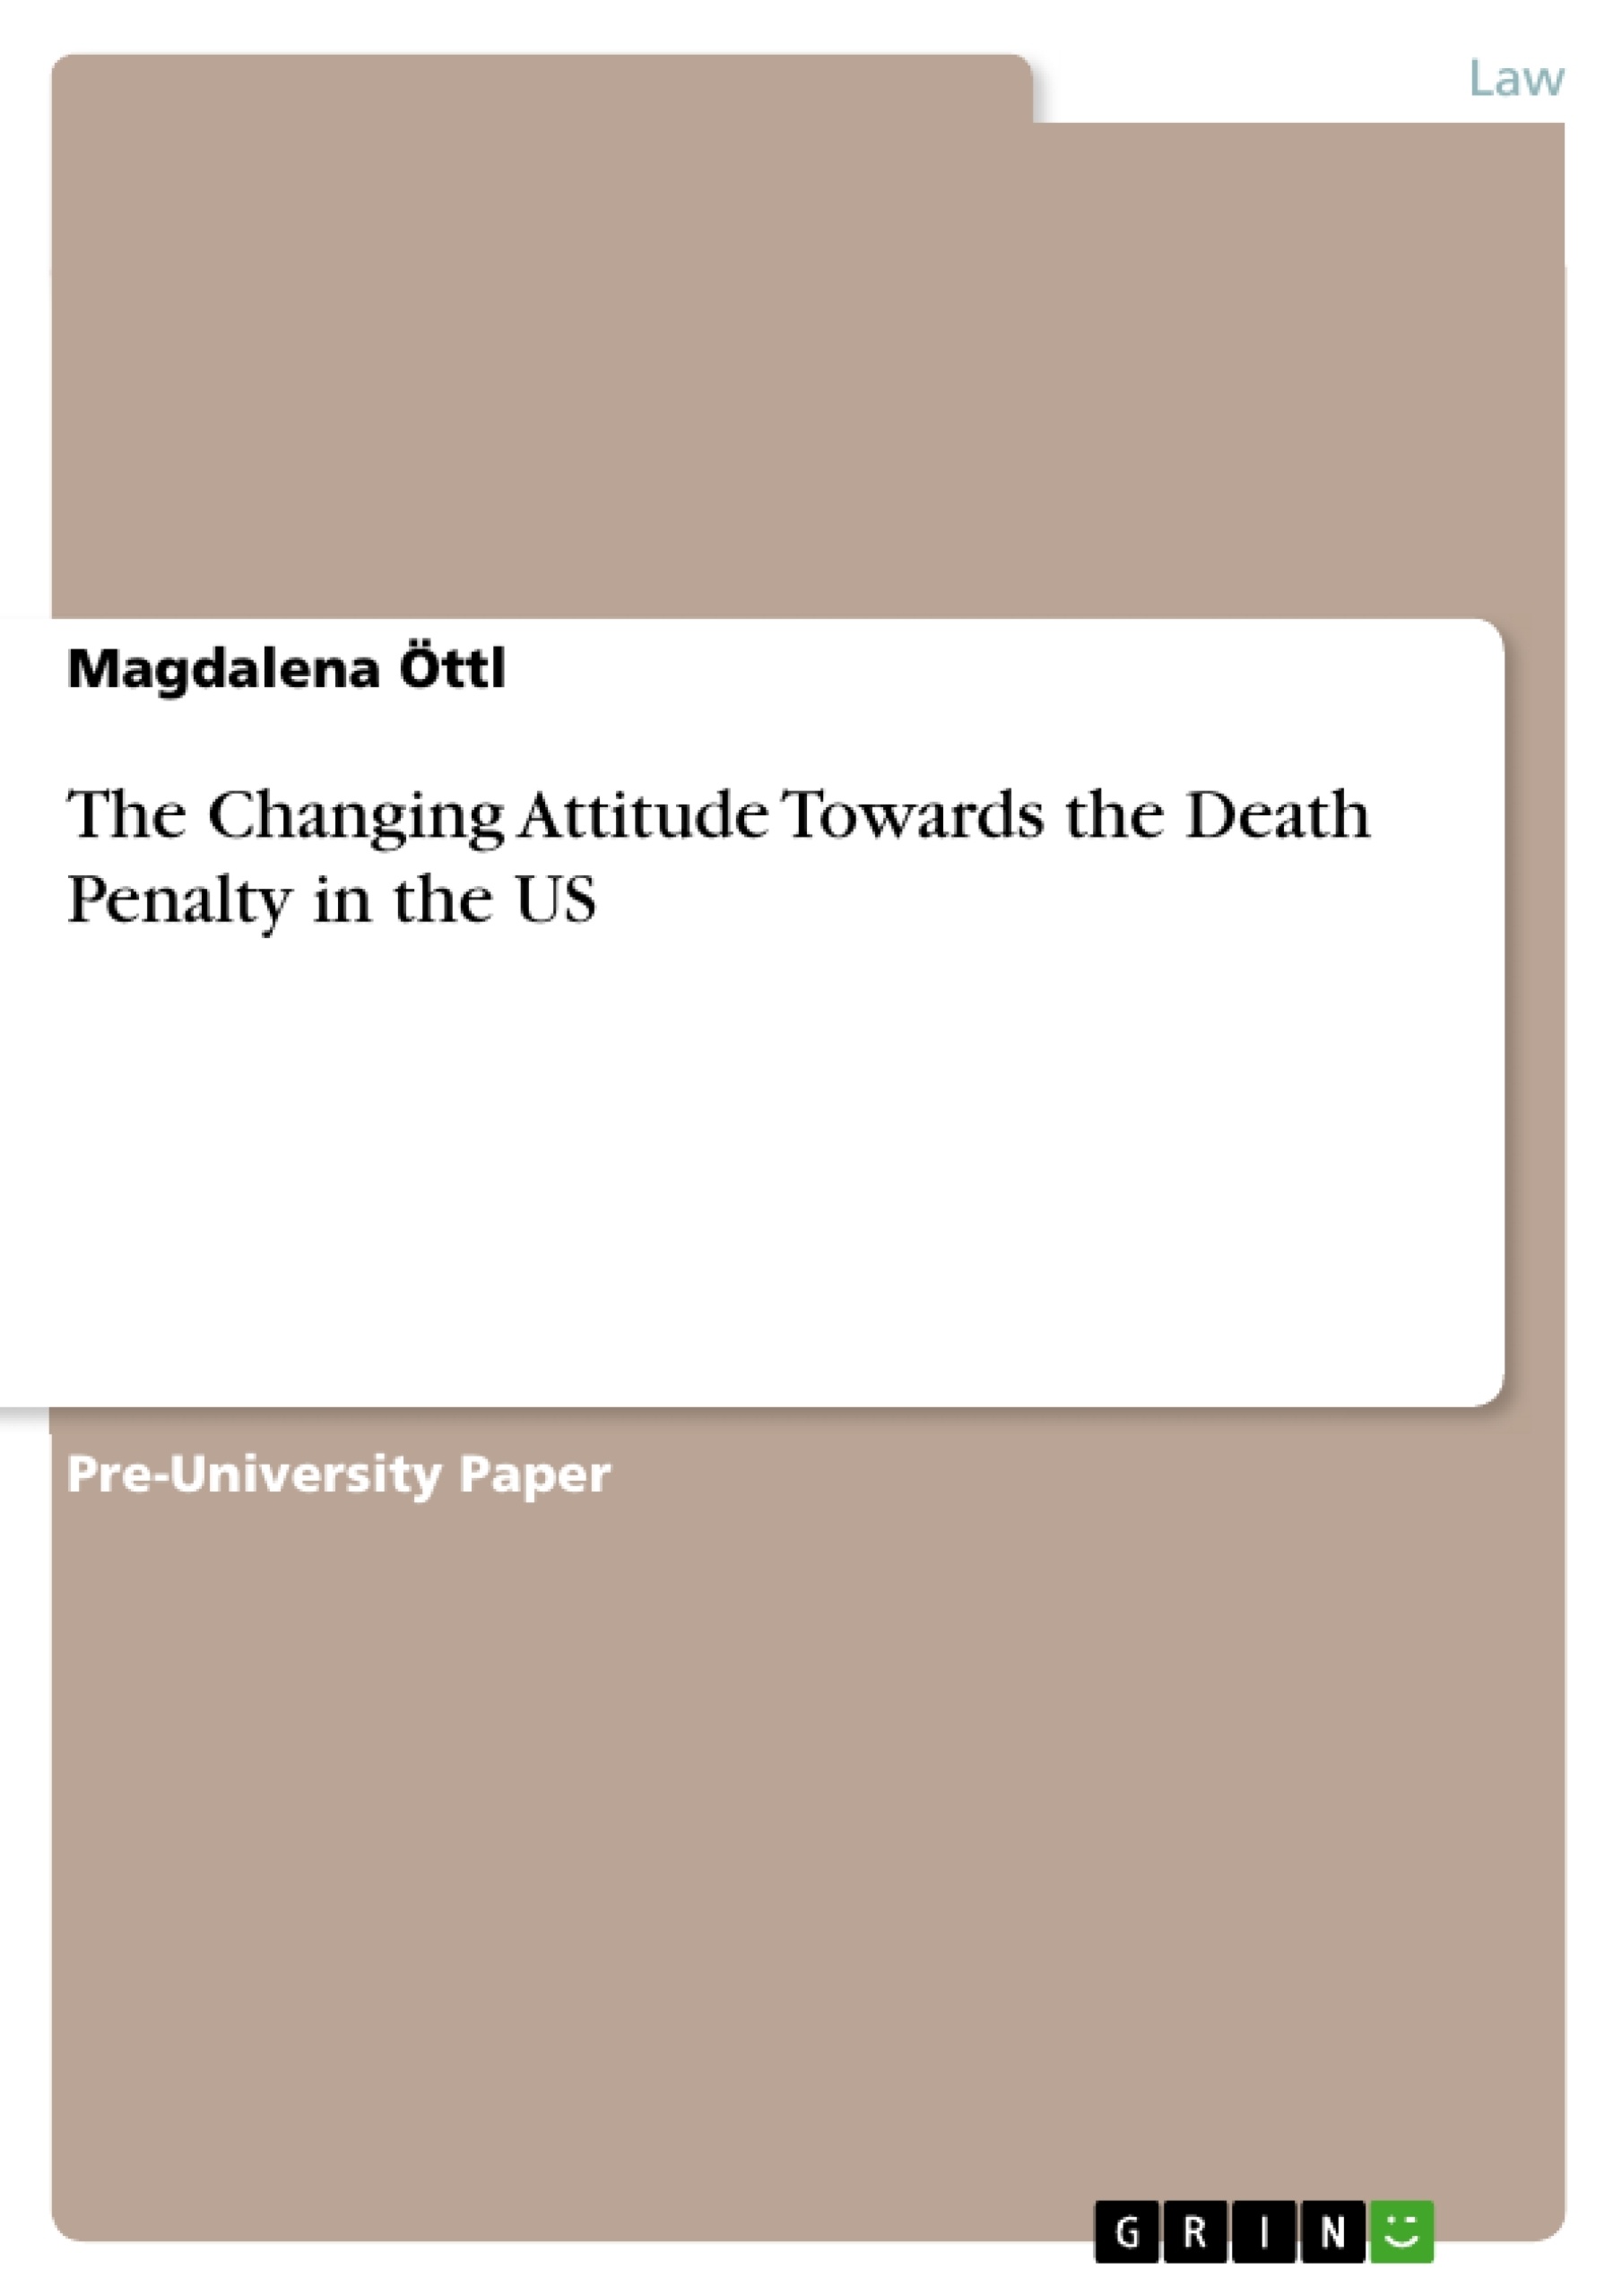 Title: The Changing Attitude Towards the Death Penalty in the US